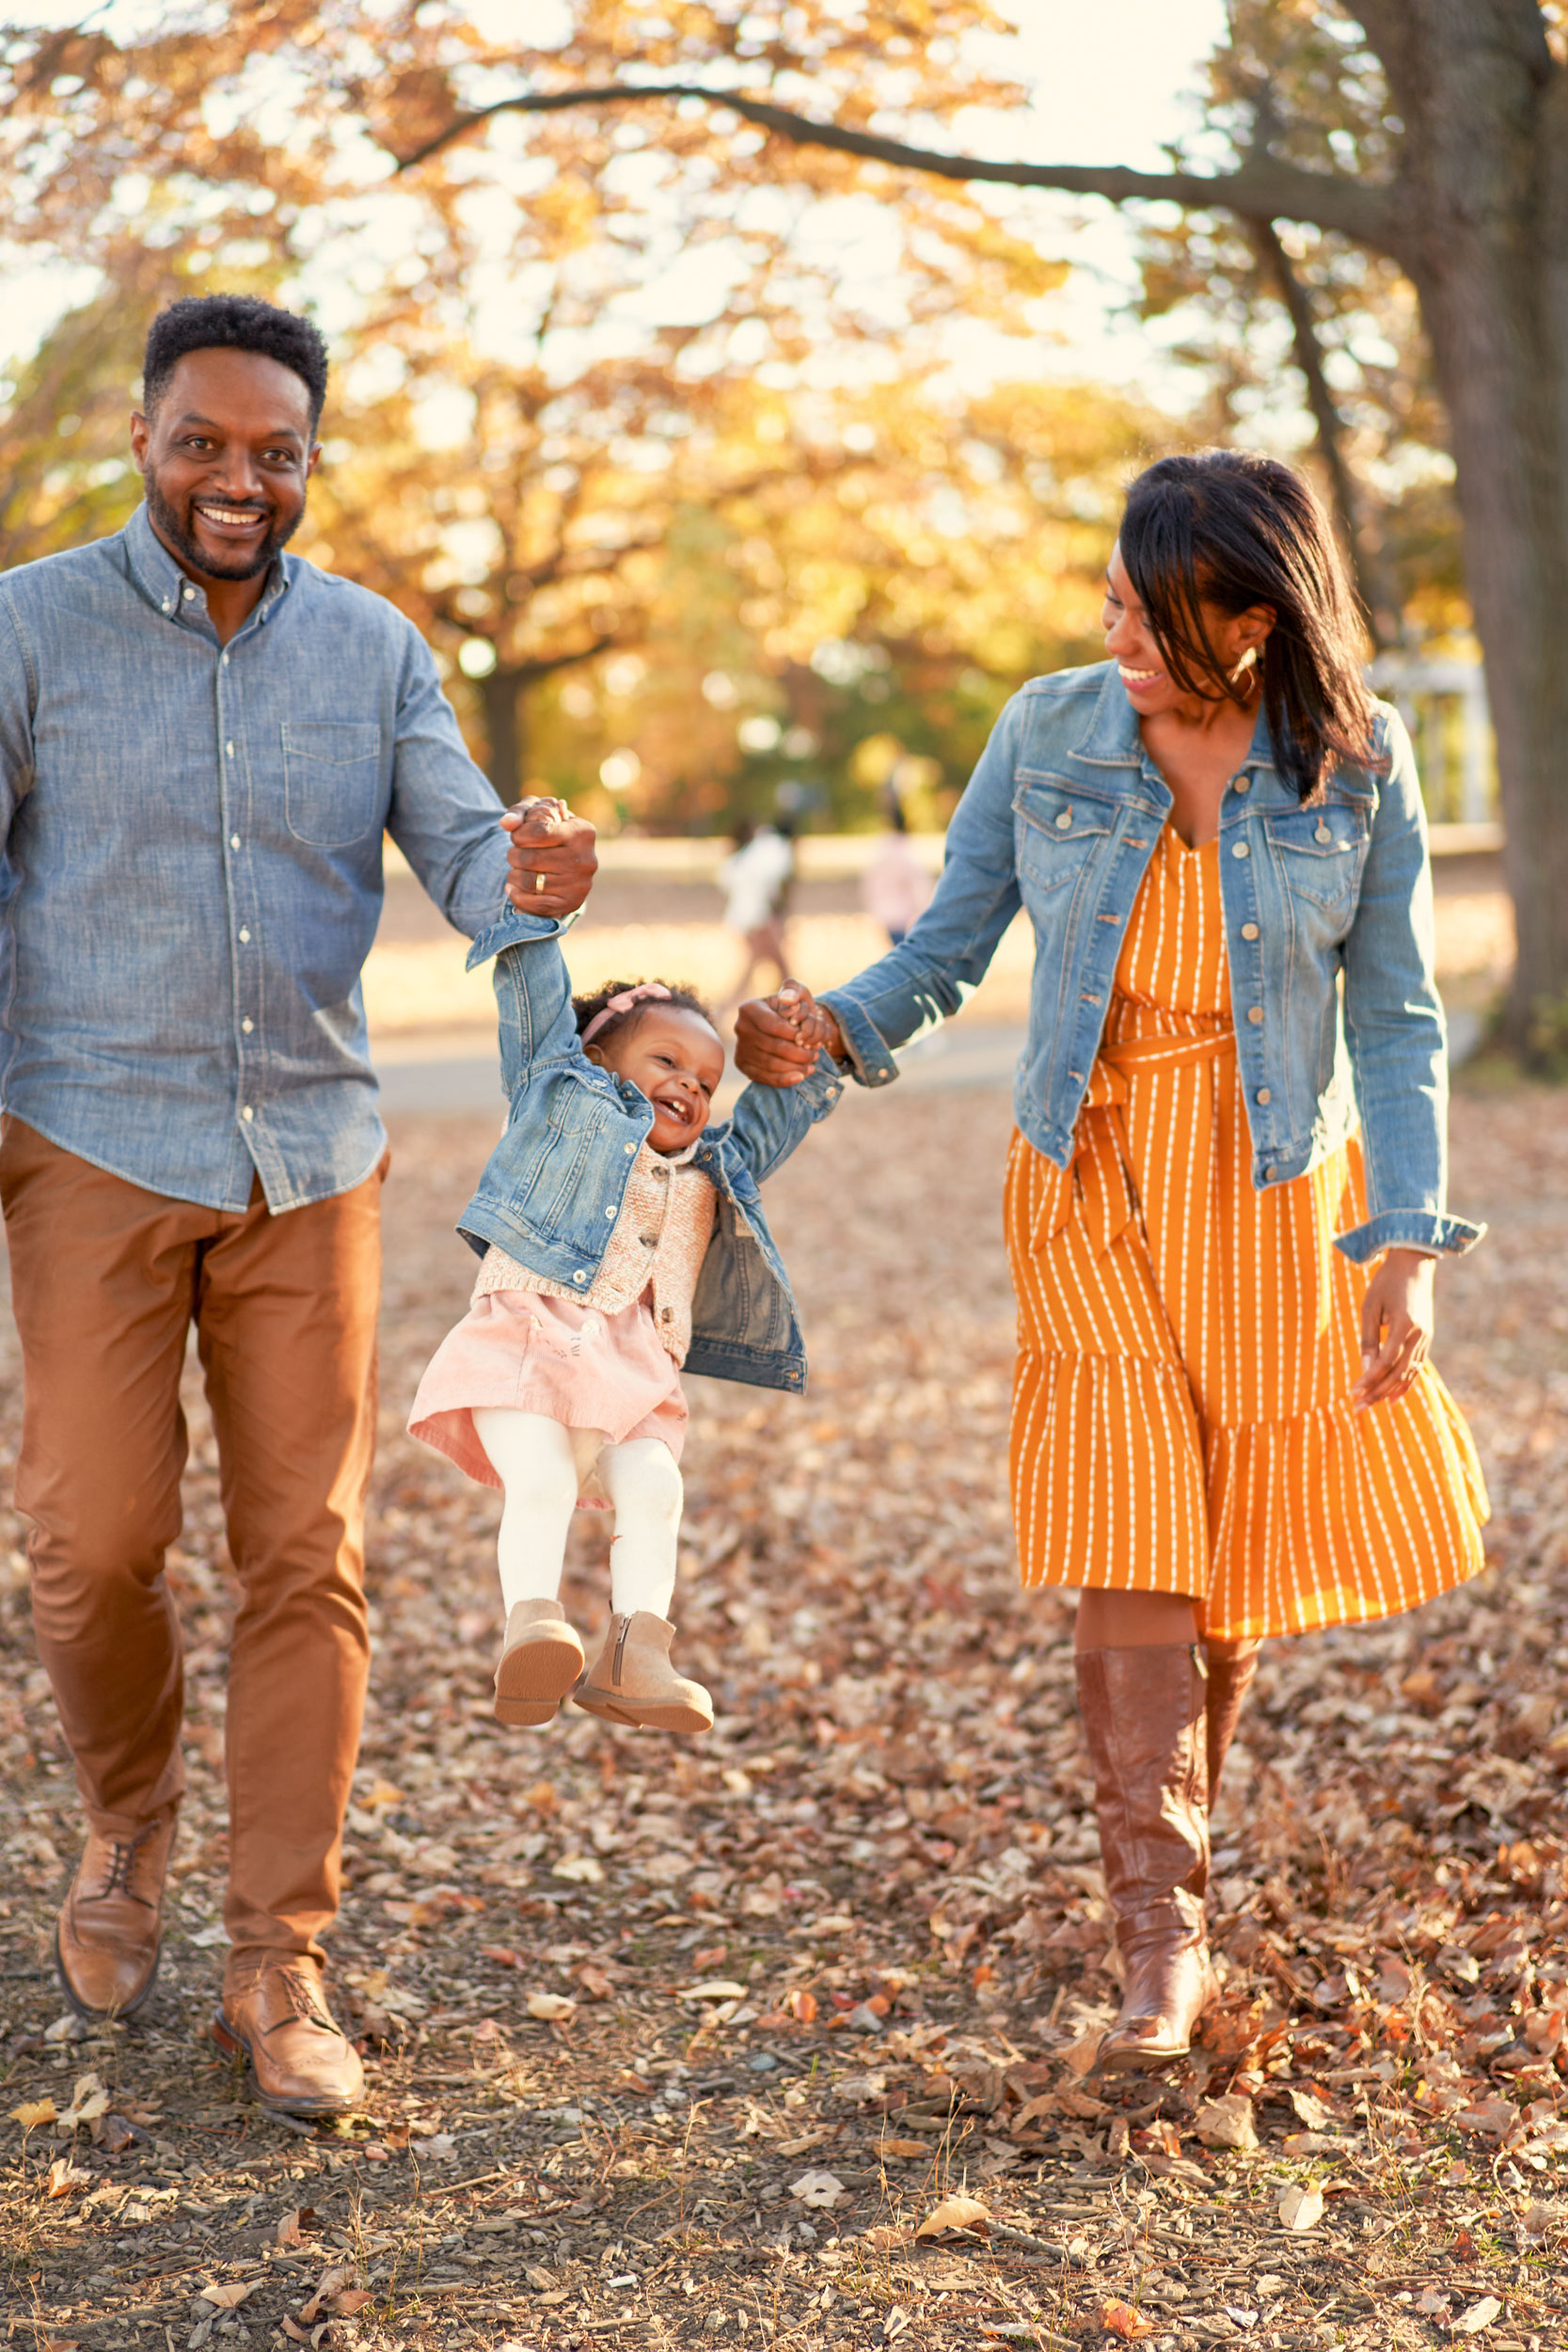 ROB-AND-TEMA-IN-THE-PARK-WITH-THEIR-BABY---FAMILY-PORTRAIT-